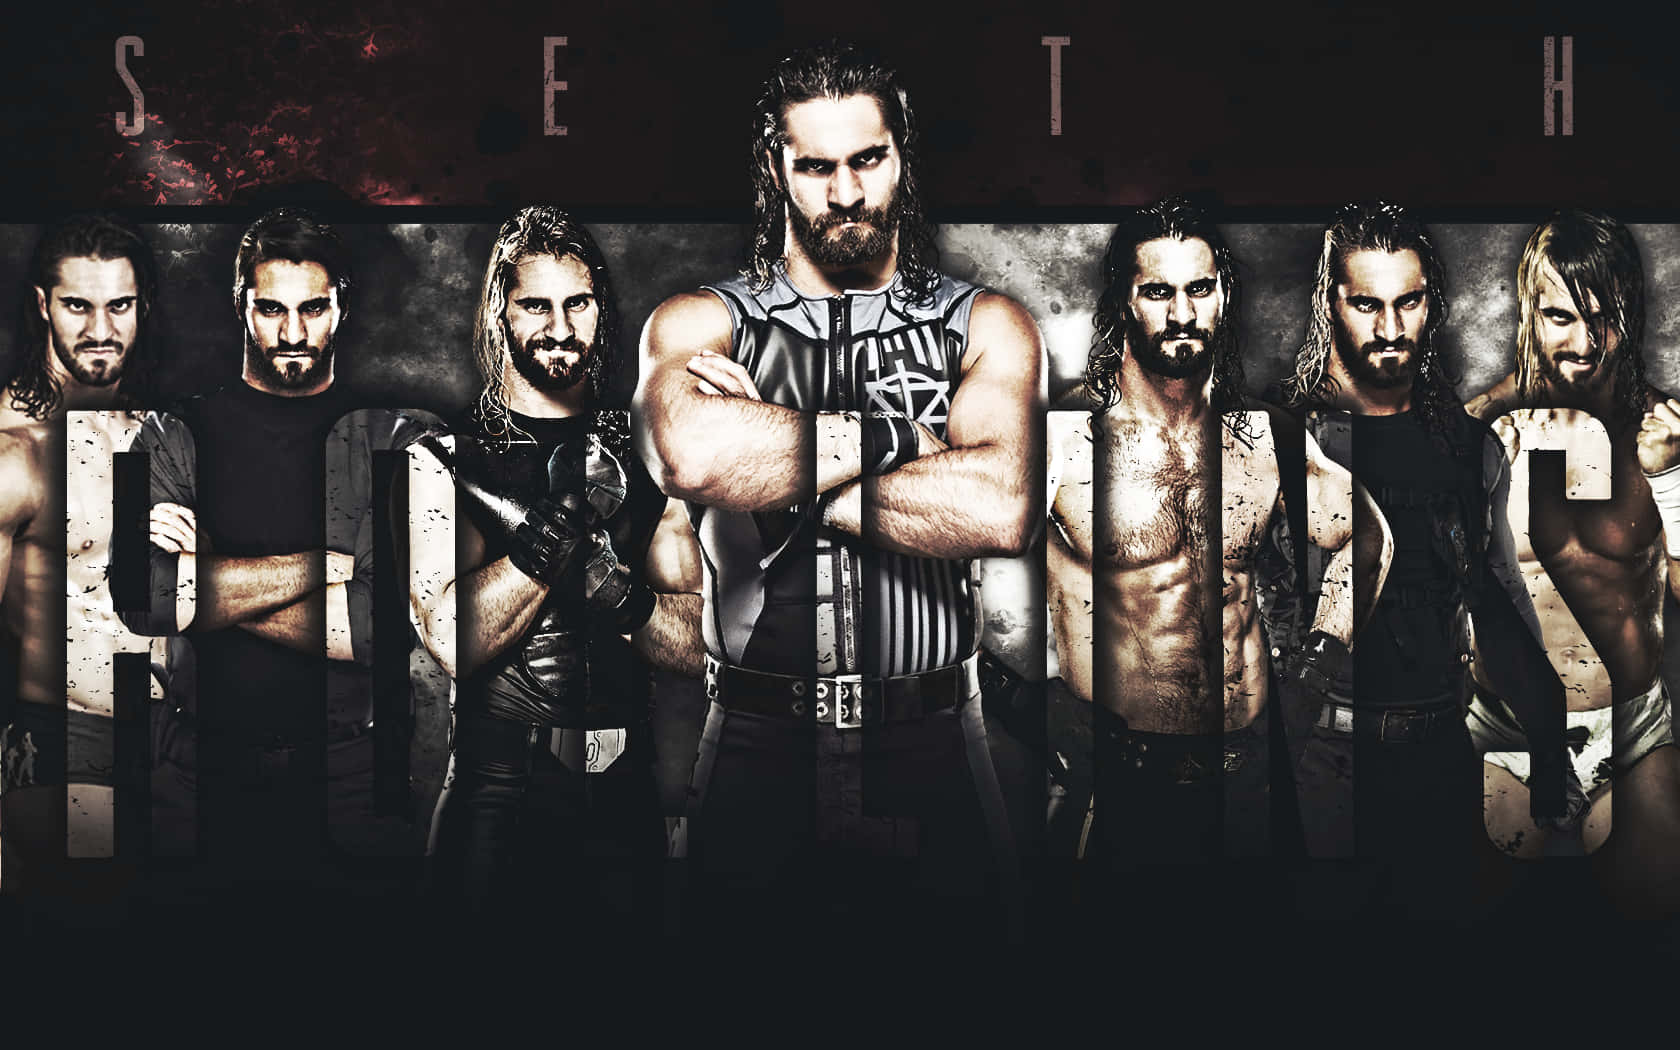 Wwe Champion Seth Rollins In Action Wallpaper